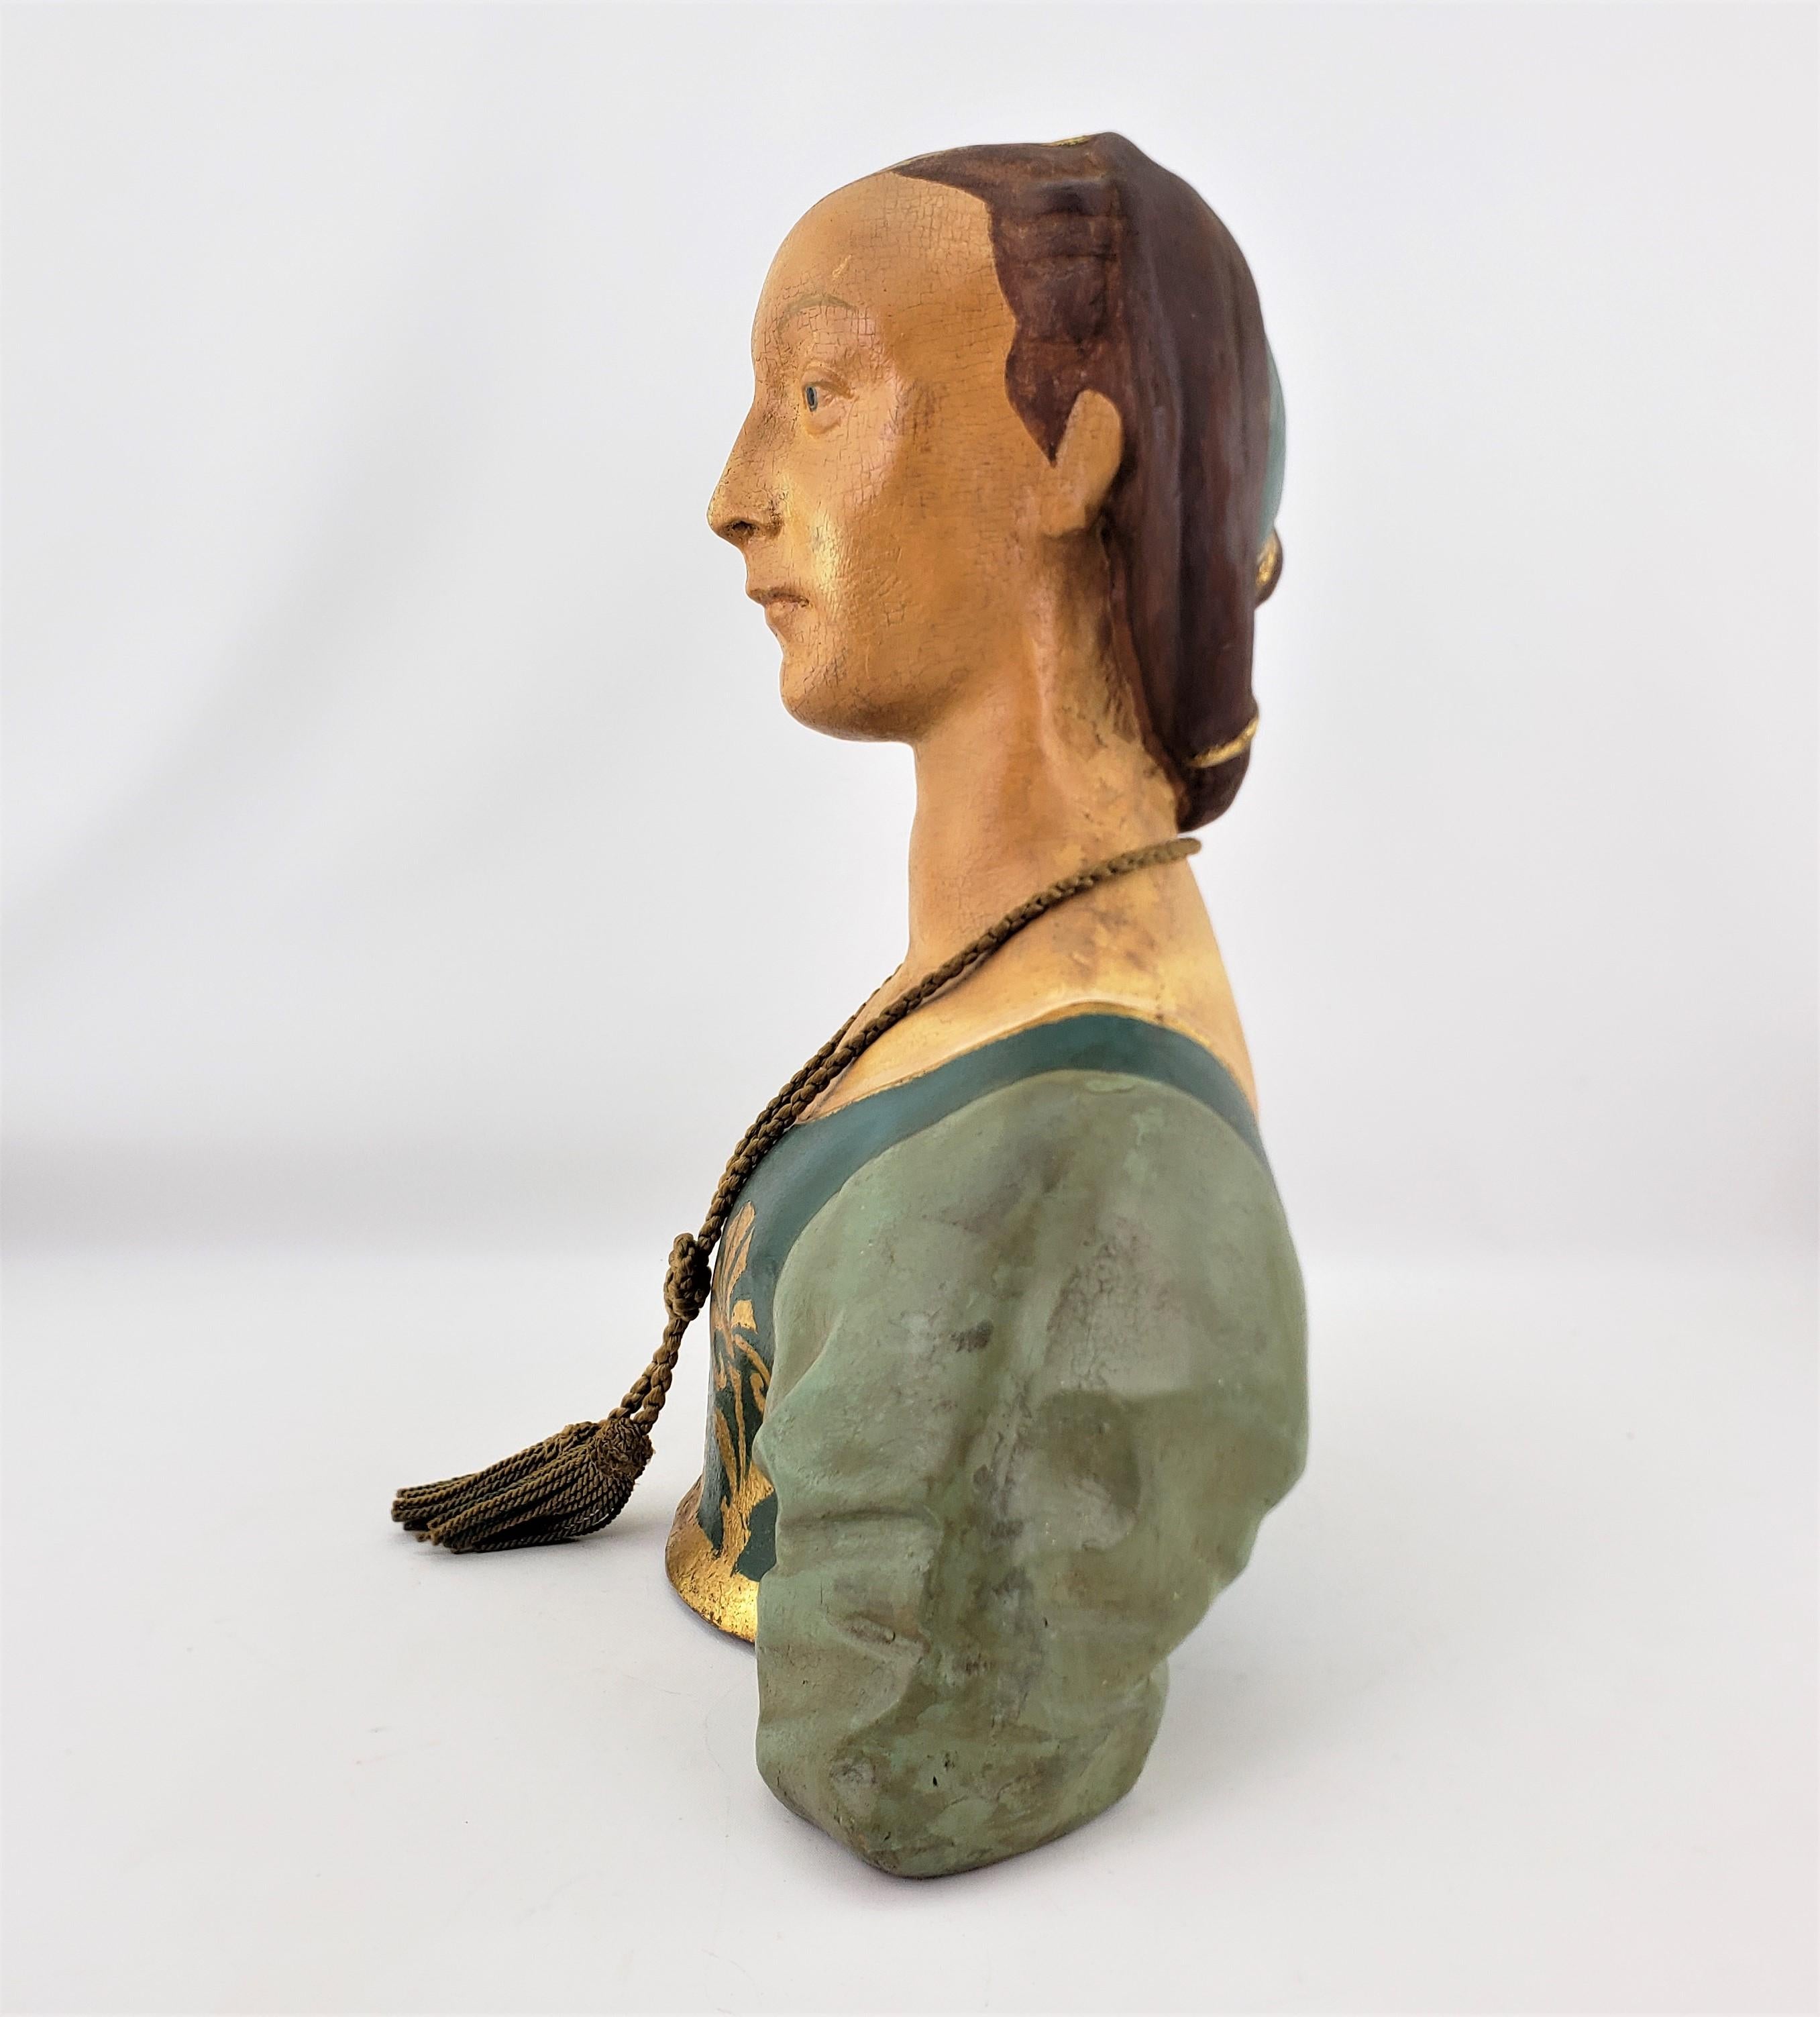 Late Victorian Antique Paper Mache Hand-Painted Bust or Sculpture of a Victorian Female